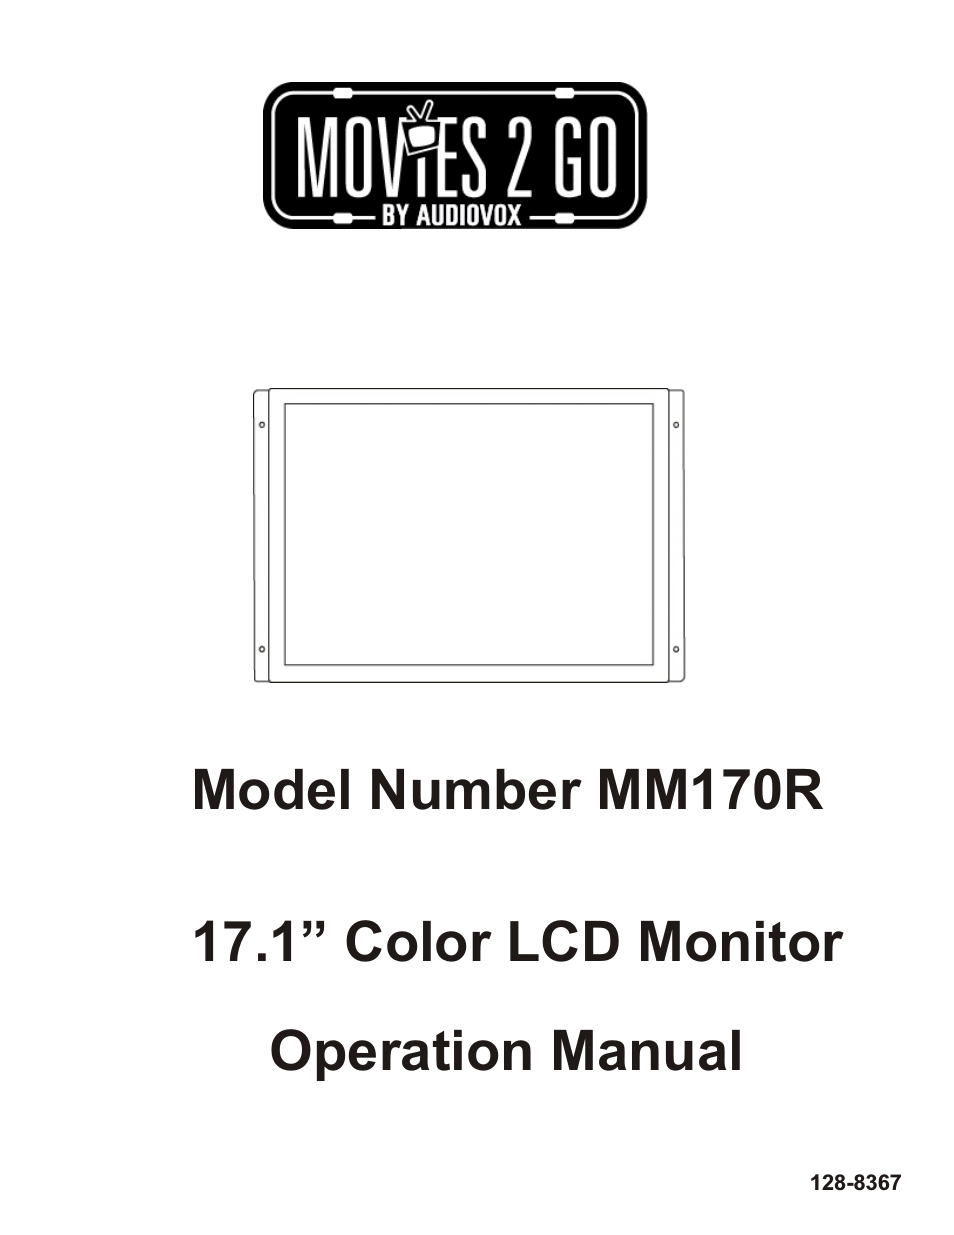 MOVIES 2 GO MM170R